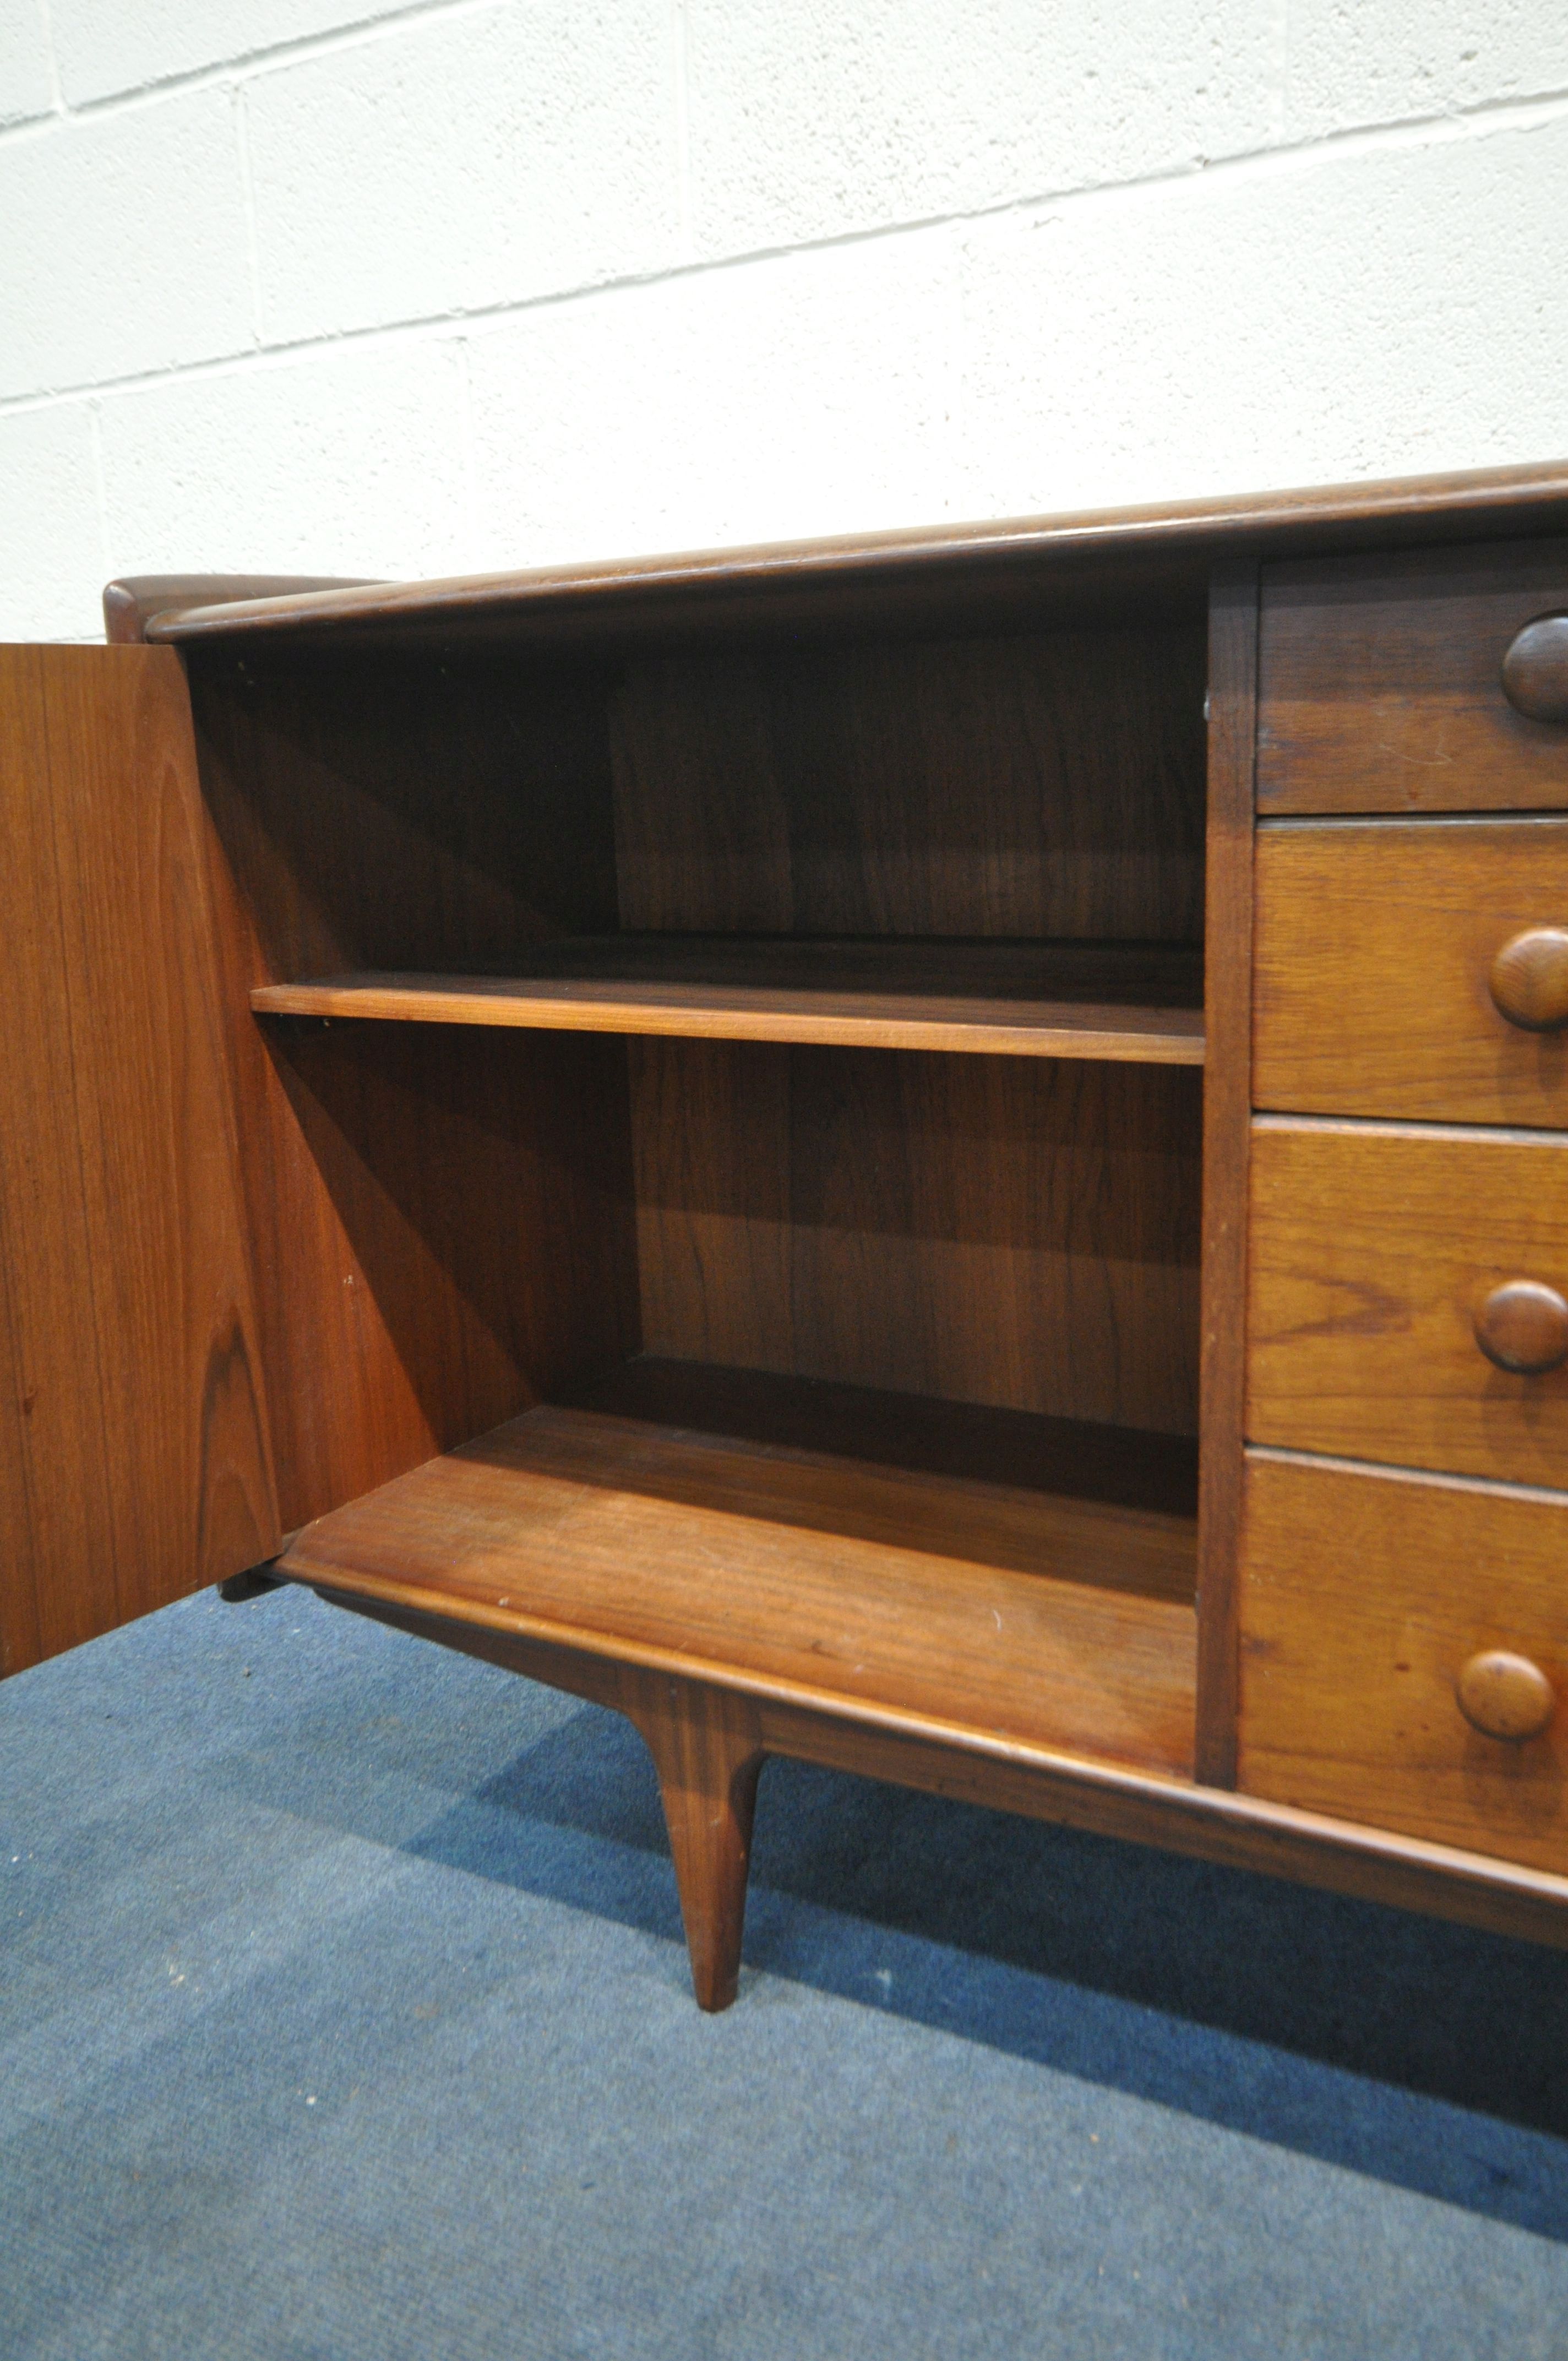 A MID CENTURY AFROMOSIA TEAK 'VOLNAY' SIDEBOARD, DESIGNED BY JOHN HERBERT FOR YOUNGER, with cupboard - Image 5 of 6